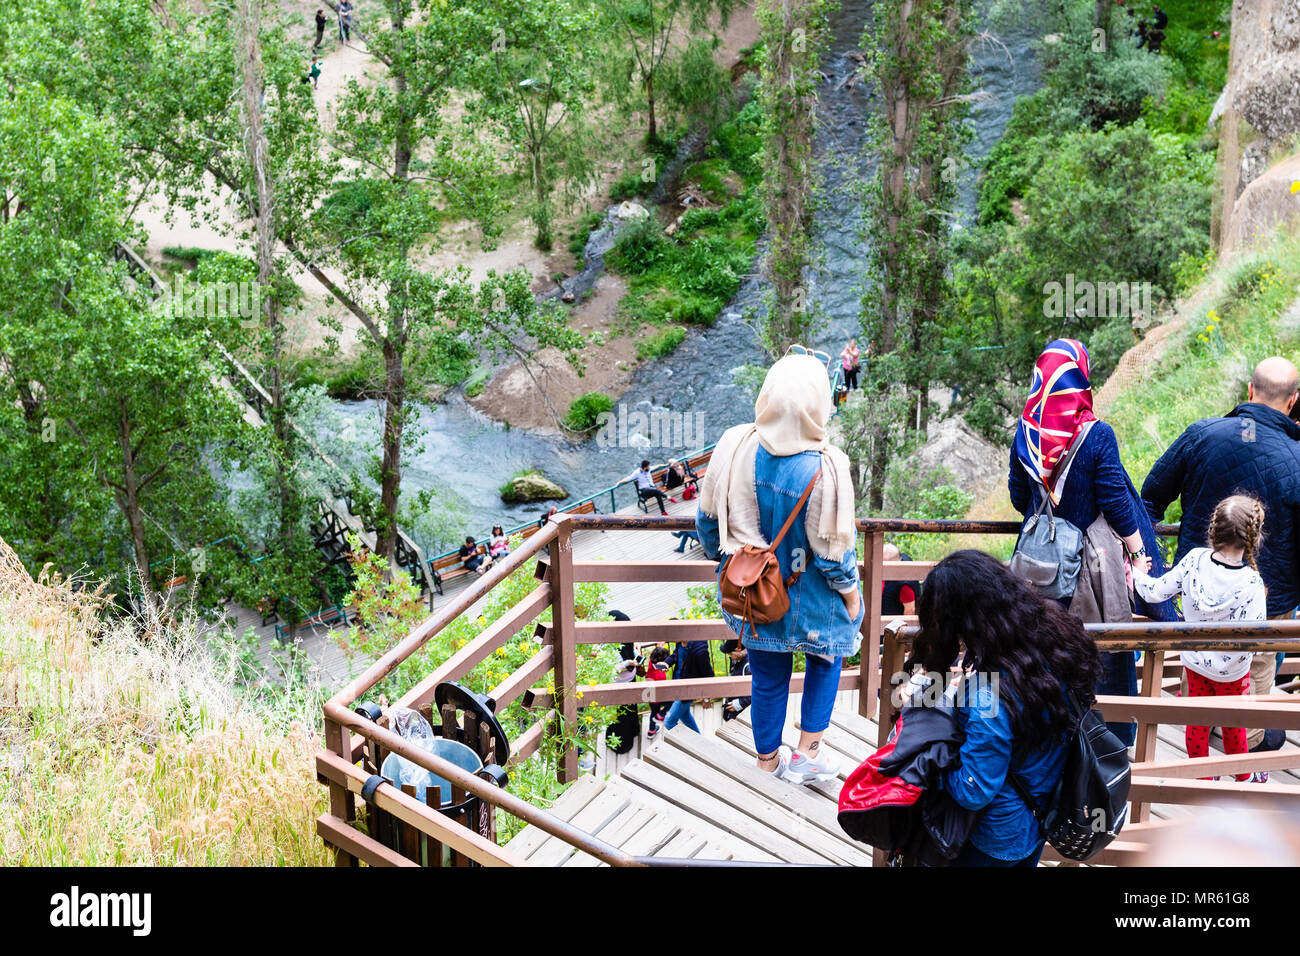 IHLARA VALLEY, TURKEY - MAY 6, 2018: tourists walk to Ihlara Valley in Aksaray Province. Ihlara Valley is 16 km long gorge, it is the most famous vall Stock Photo